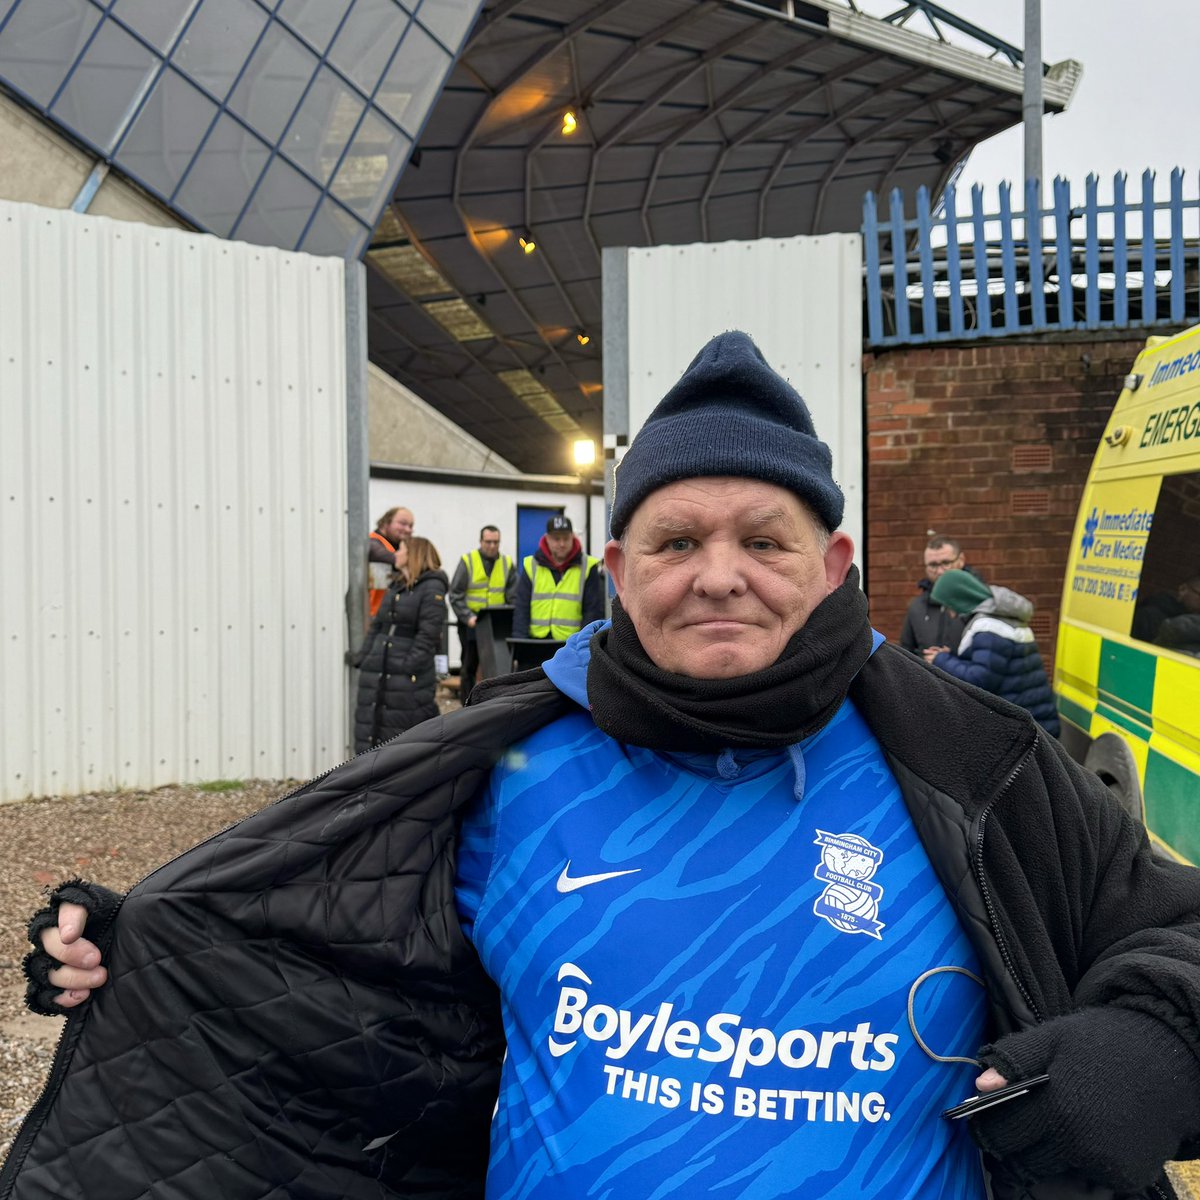 🗣️ “I’ve got my lucky top on tonight. We’re all with you lads!” John from Coventry is ready for a big one under the B9 lights. ✨ #BCFC